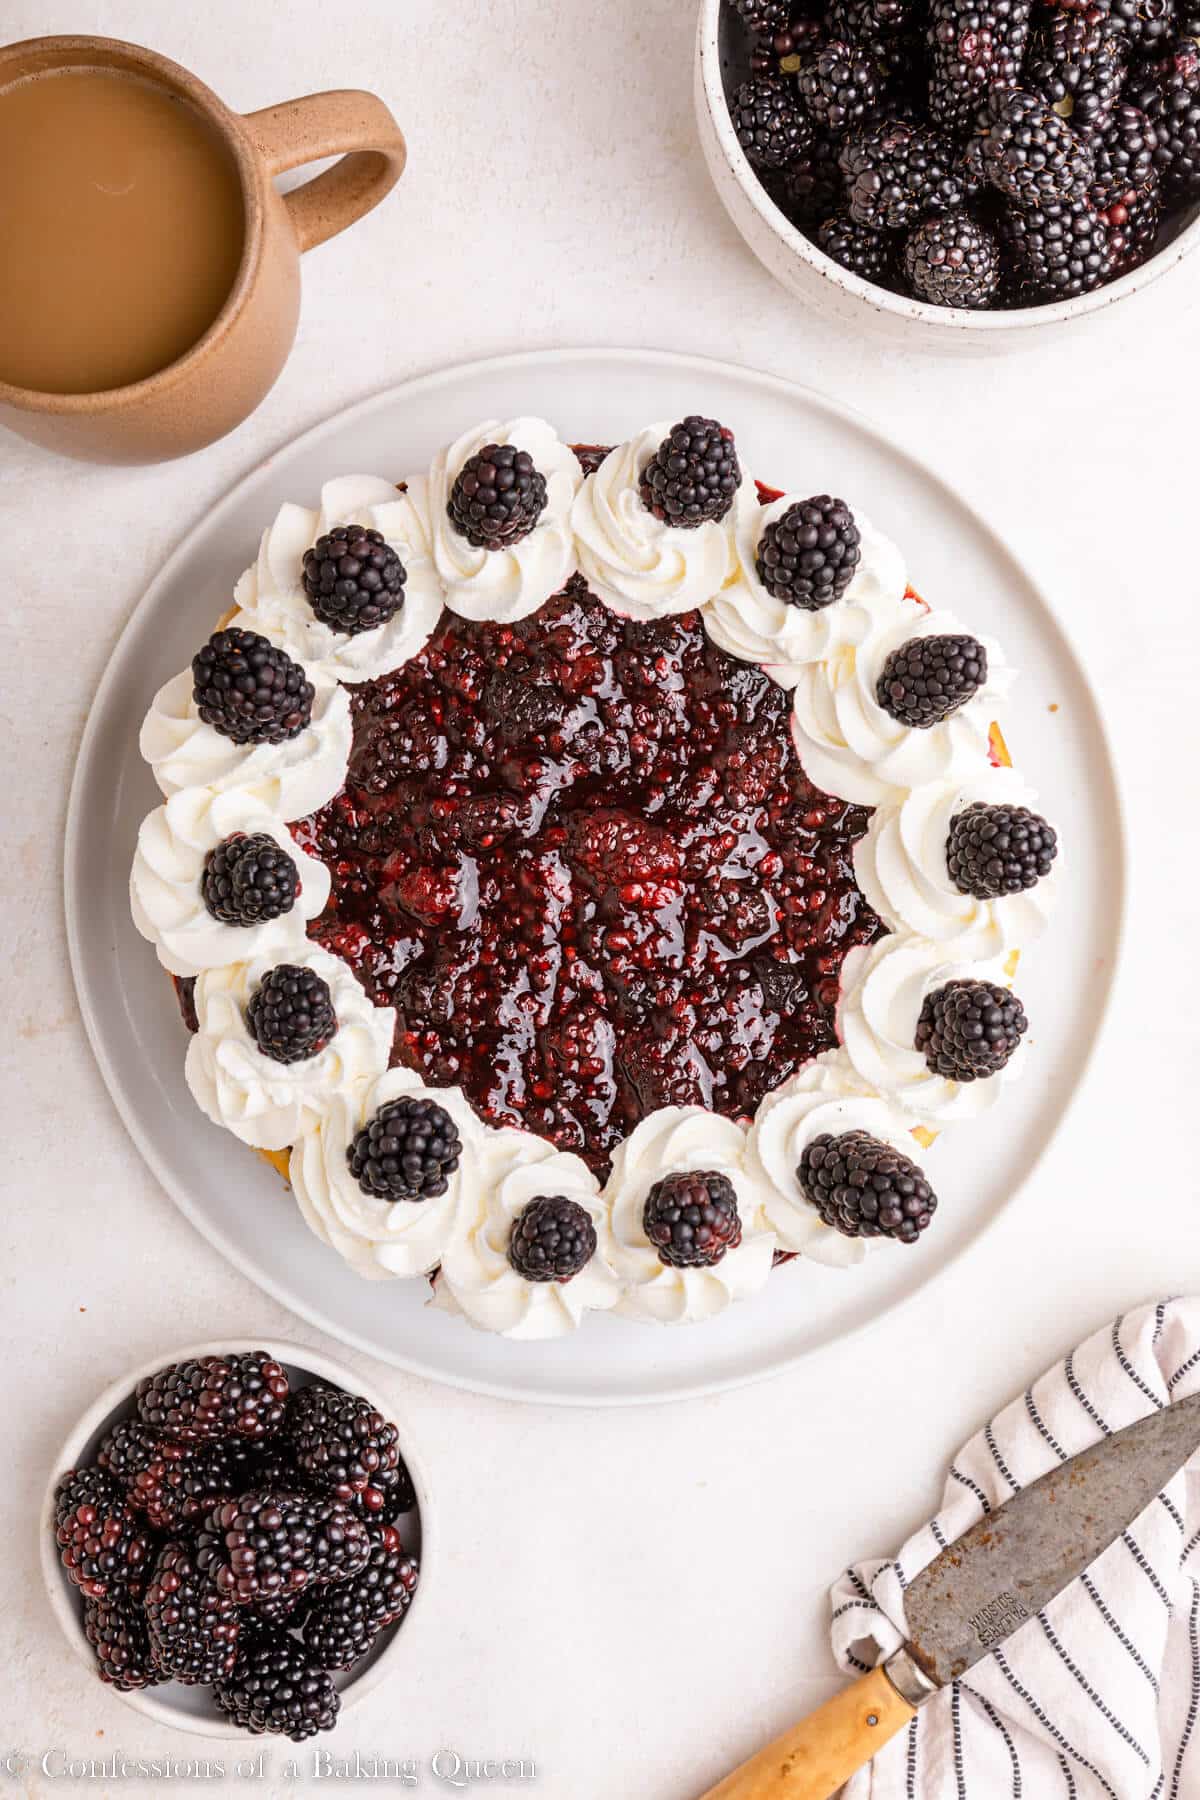 blackberry cheesecake served with coffee and more berries on a light surface